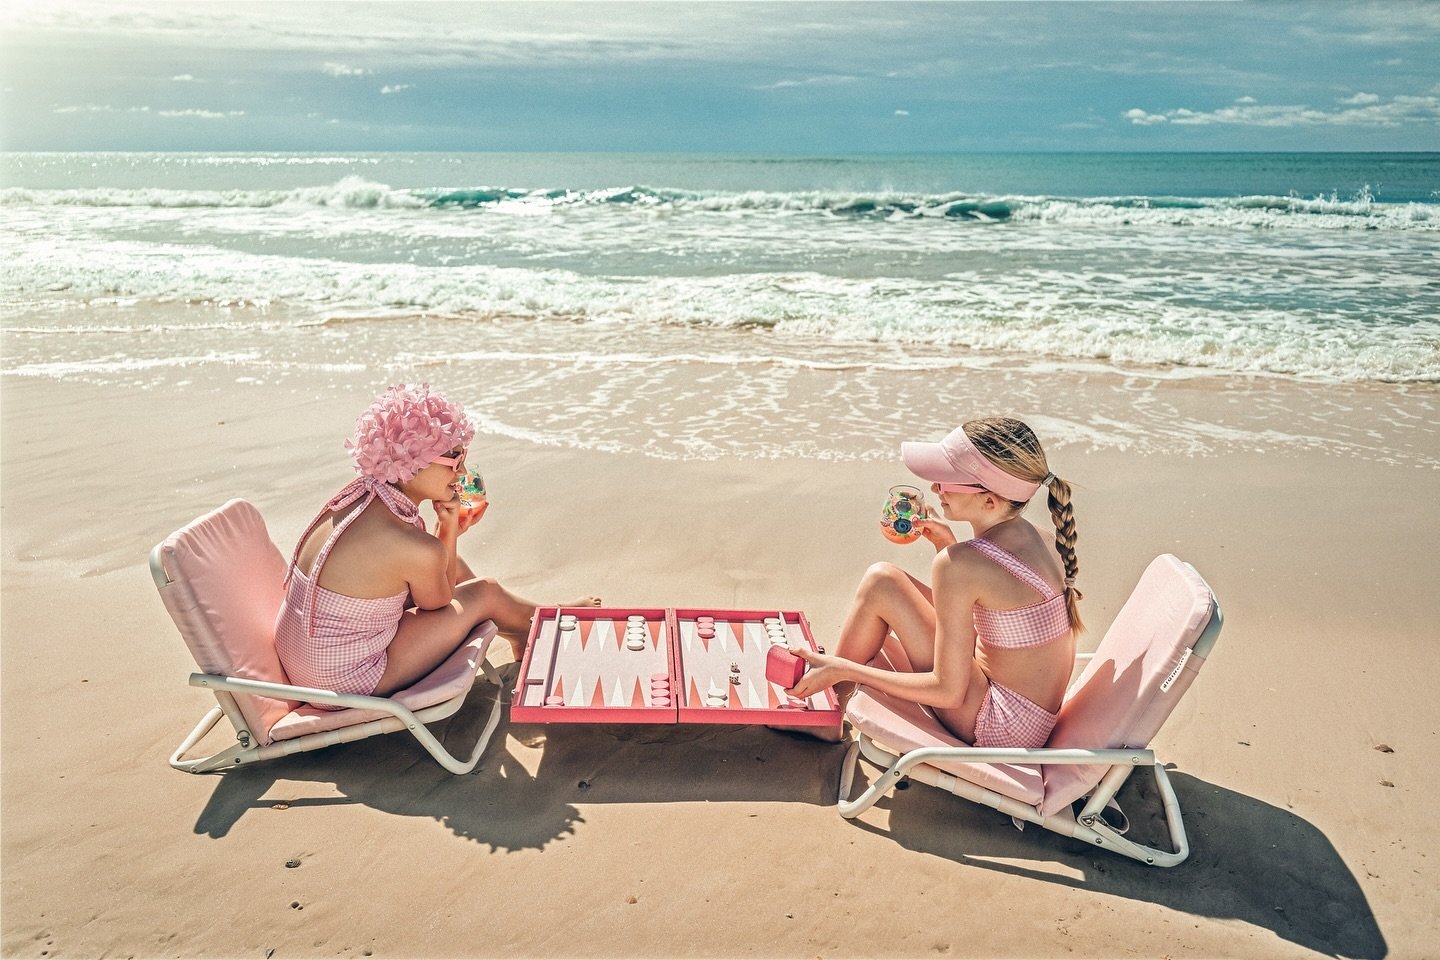 Backgammon babes&hellip;
The girls have recently discovered backgammon, and really enjoy it. I have to say I&rsquo;m pretty pumped it caught on because it&rsquo;s just the cutest thing. 
Inspired by @slimaarons and @nickmelephotography backgammon sho